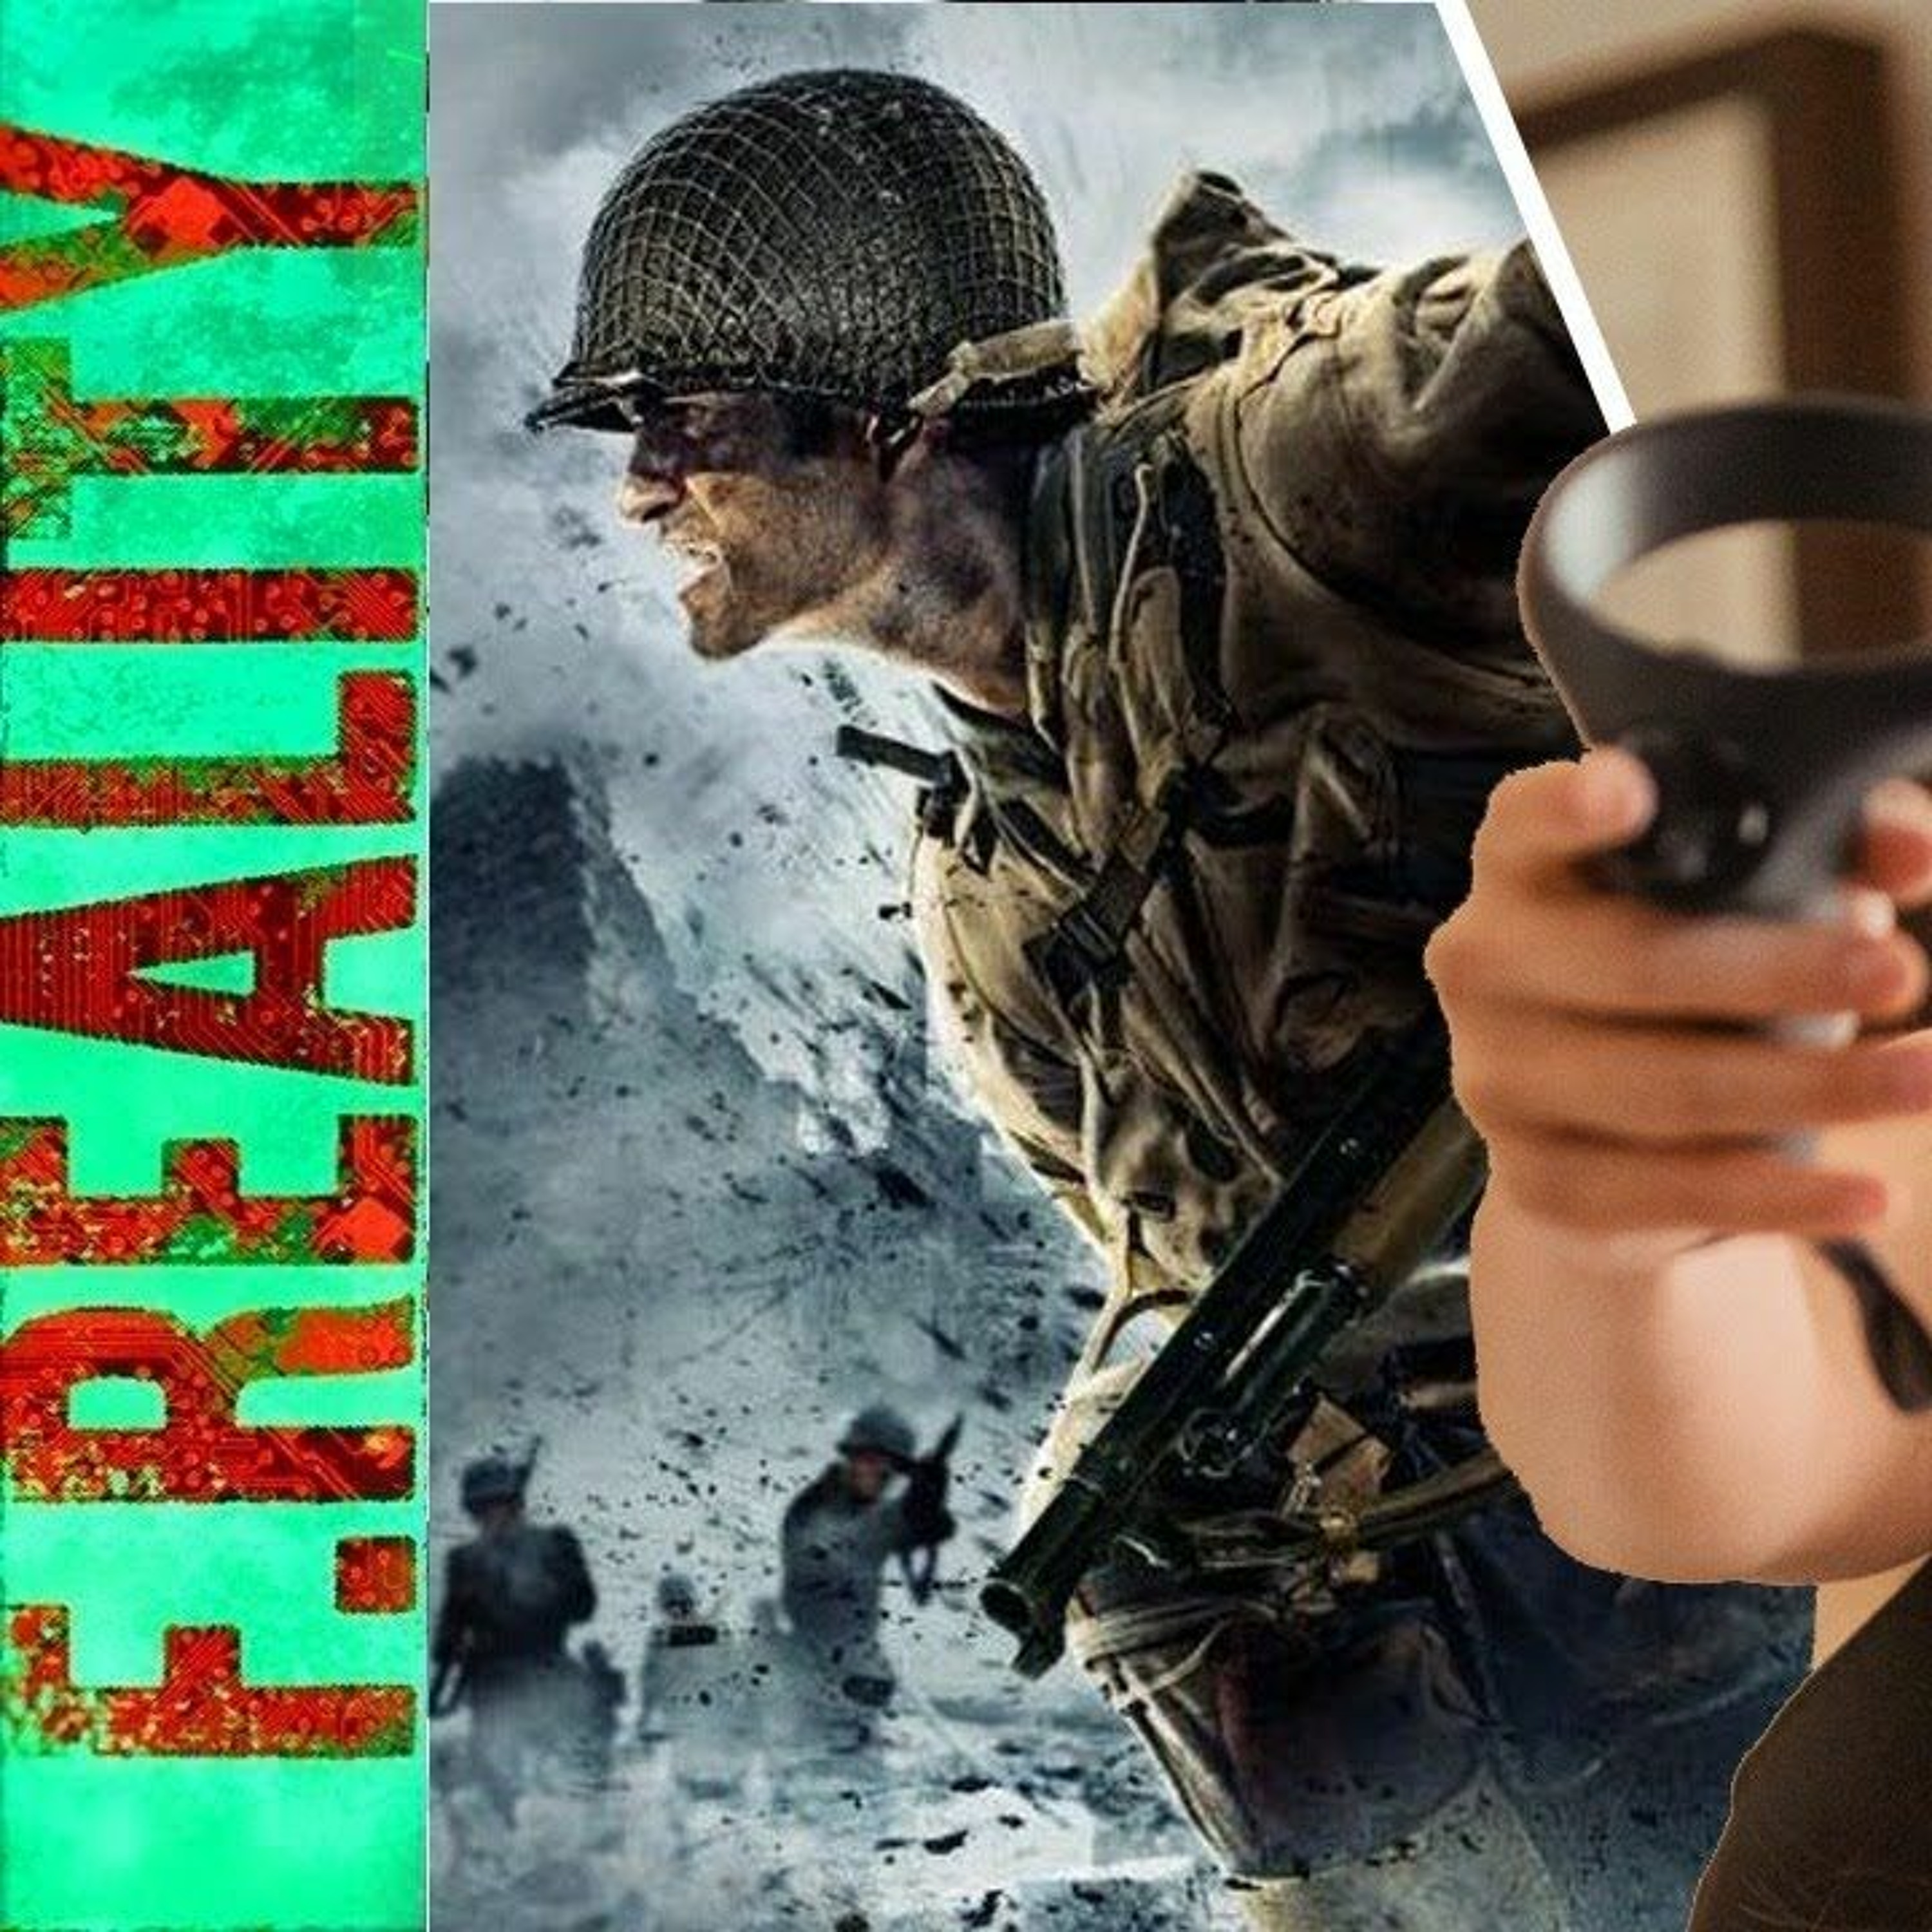 Ep.170 - Medal of Honor VR Review, Oculus Rift S on Sale and Facebook vs Government